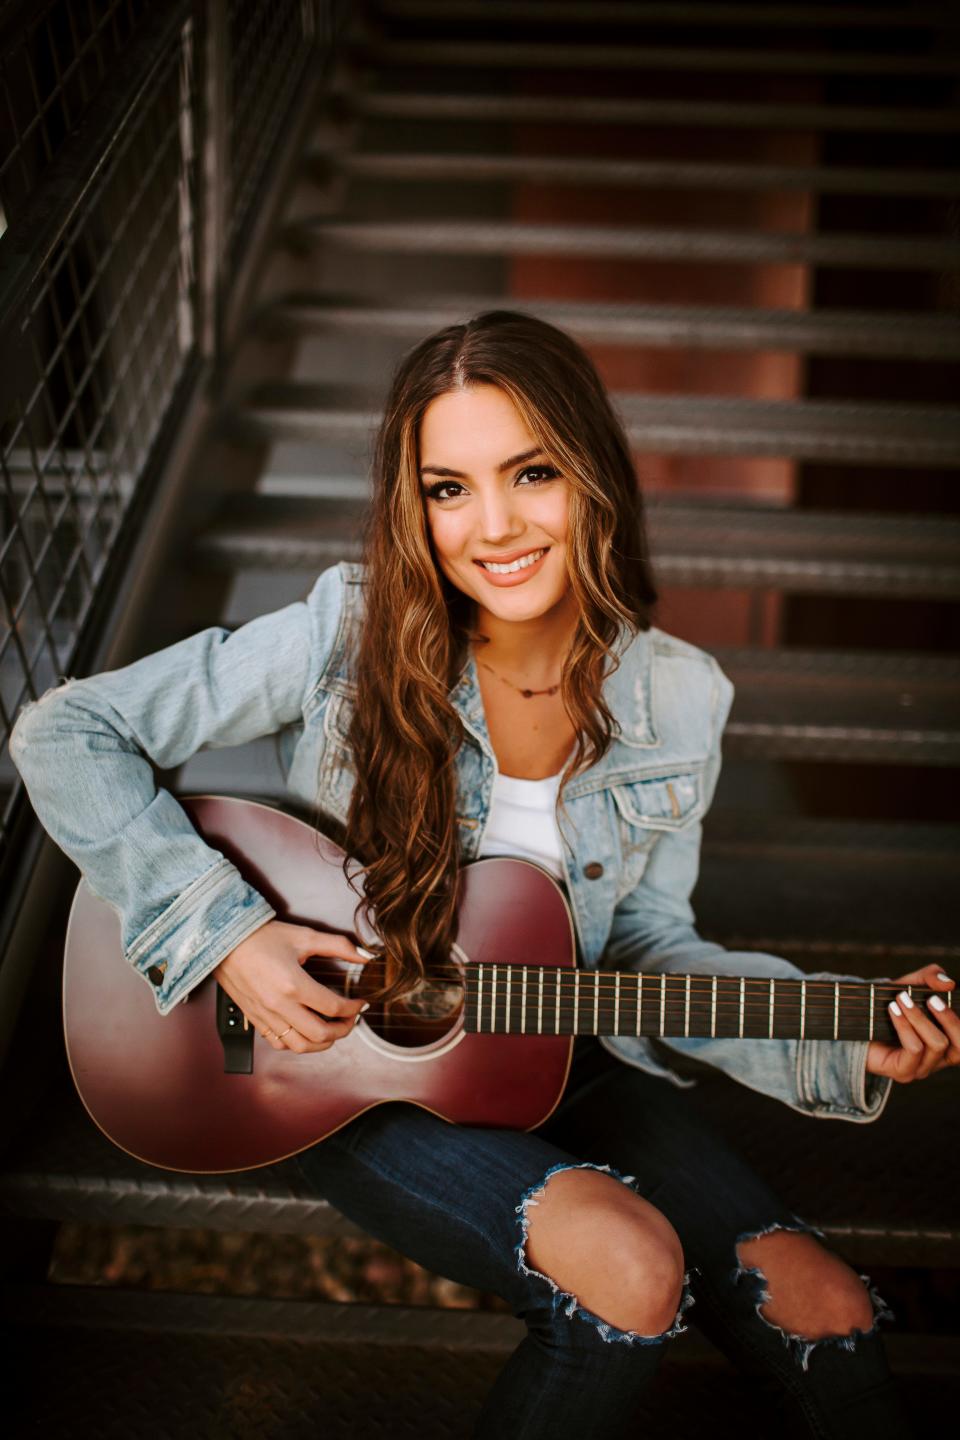 Stark County native Lauren Mascitti will headline a free May 21 concert at Centennial Plaza in downtown Canton benefiting first responders. Mascitti, a registered nurse, was an "American Idol" contender in 2020.